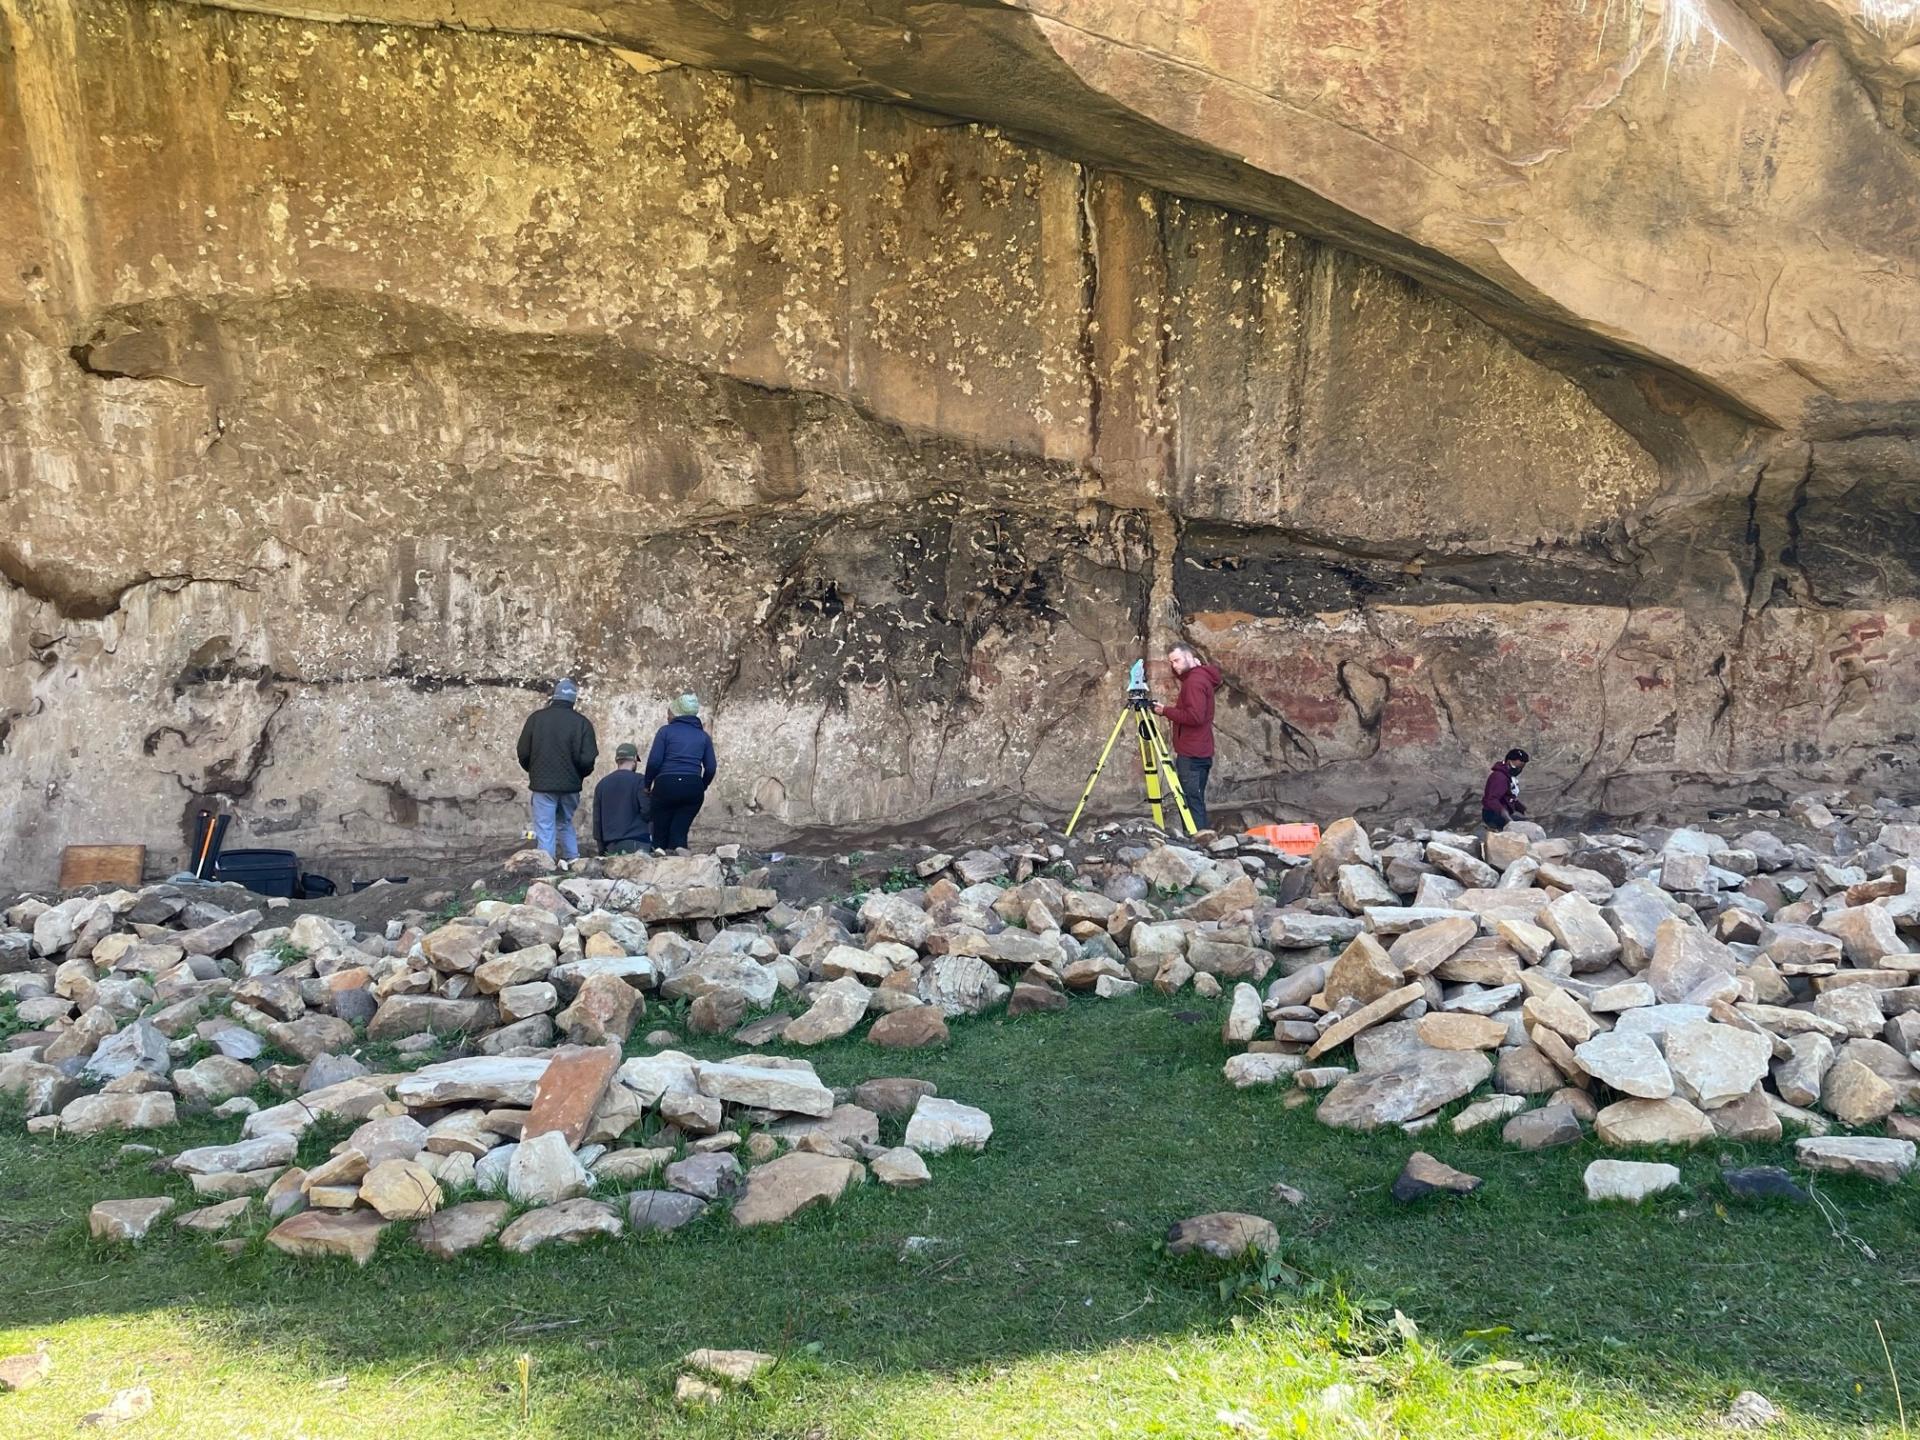 Archaologists surveying in the rock shelter of Ha Soloja, Lesotho